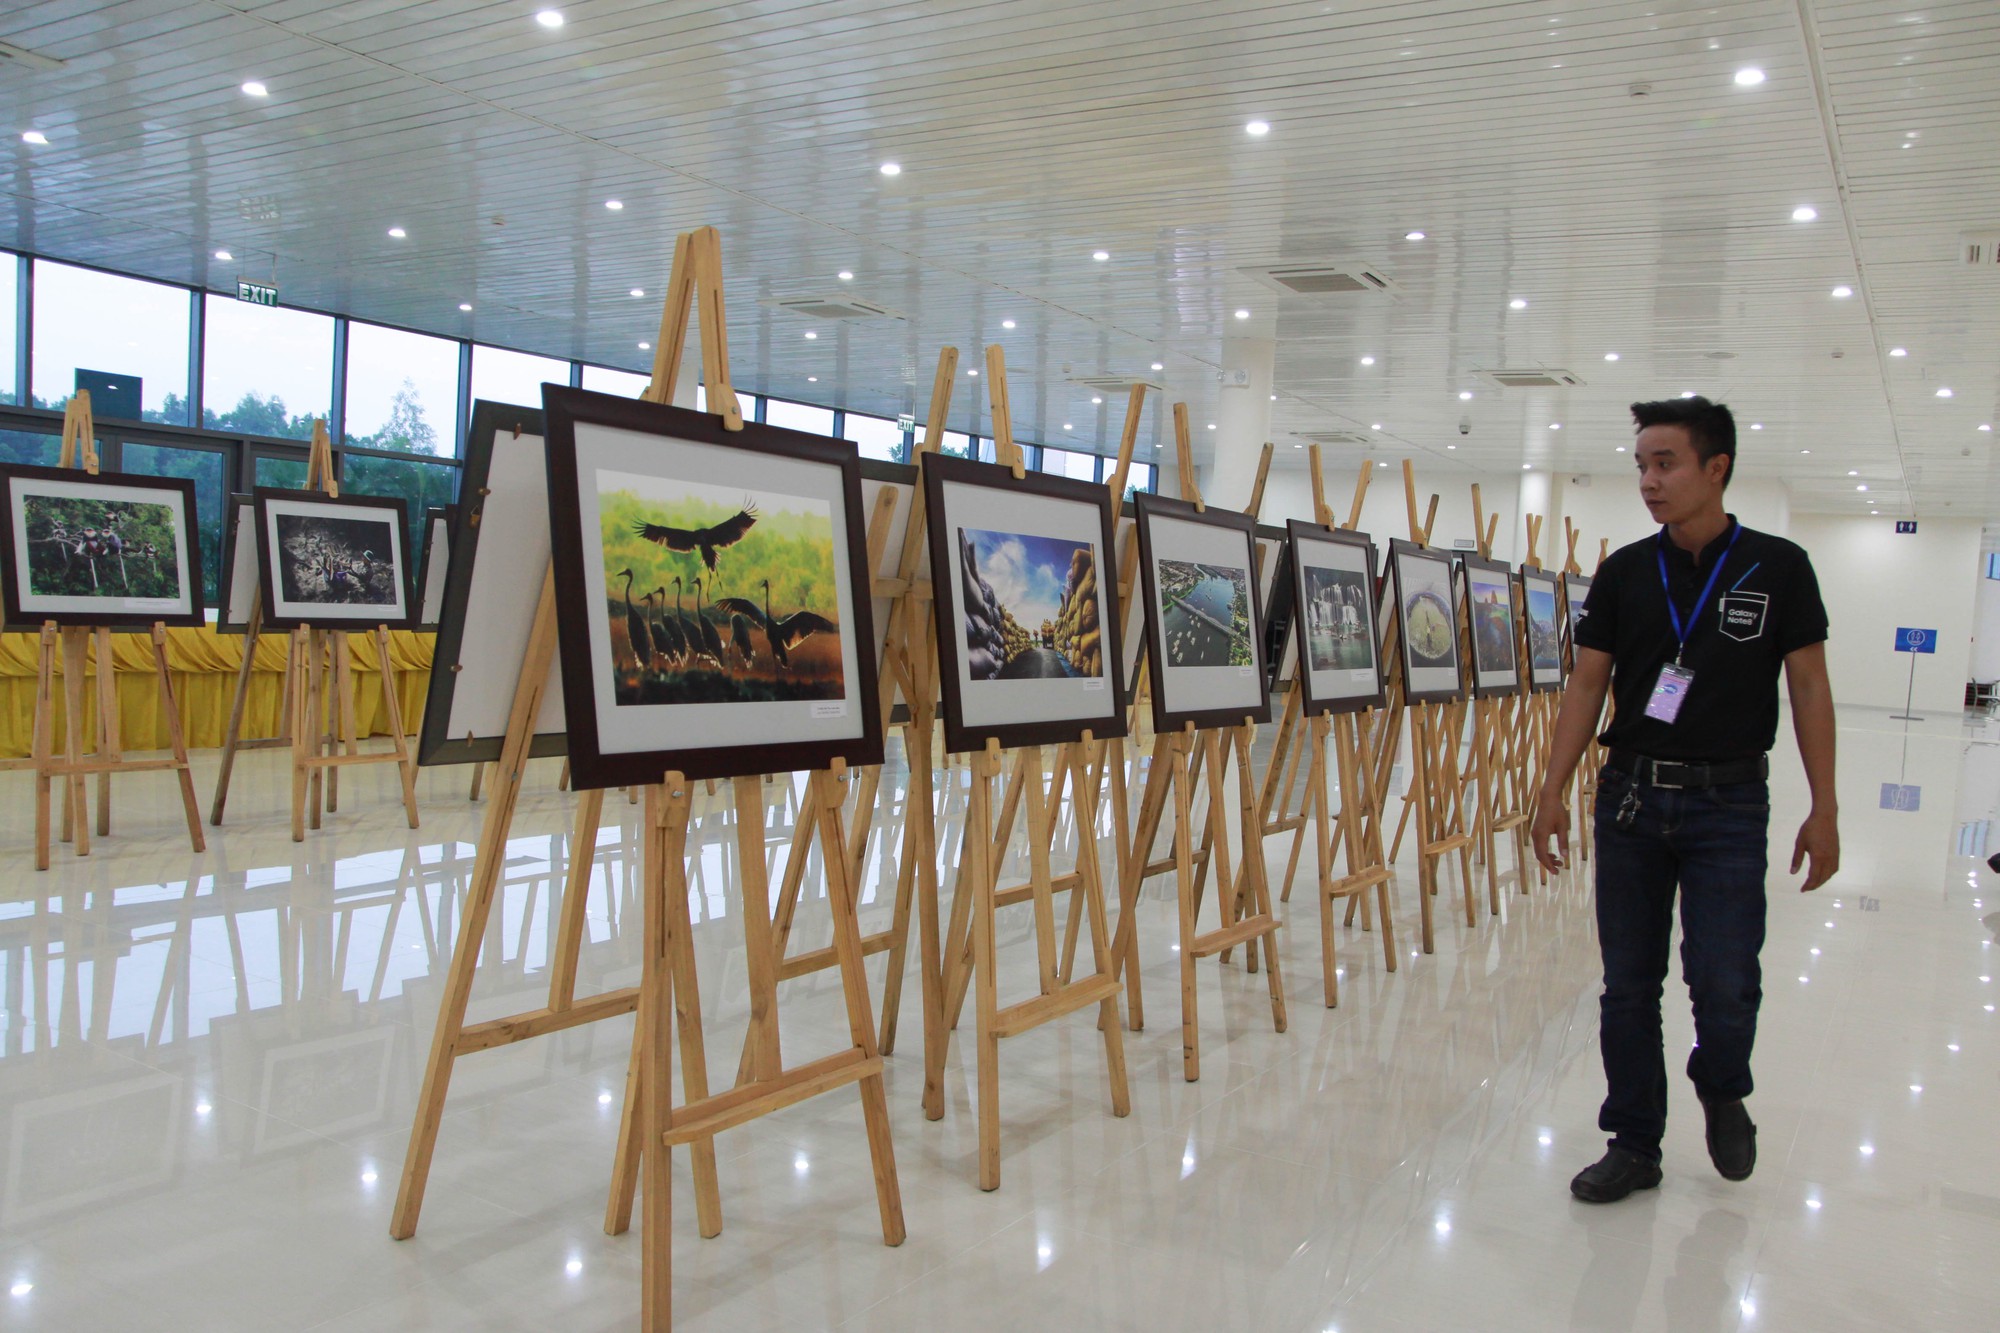 A gallery introducing the beauty of Vietnam is concluded in the venue.